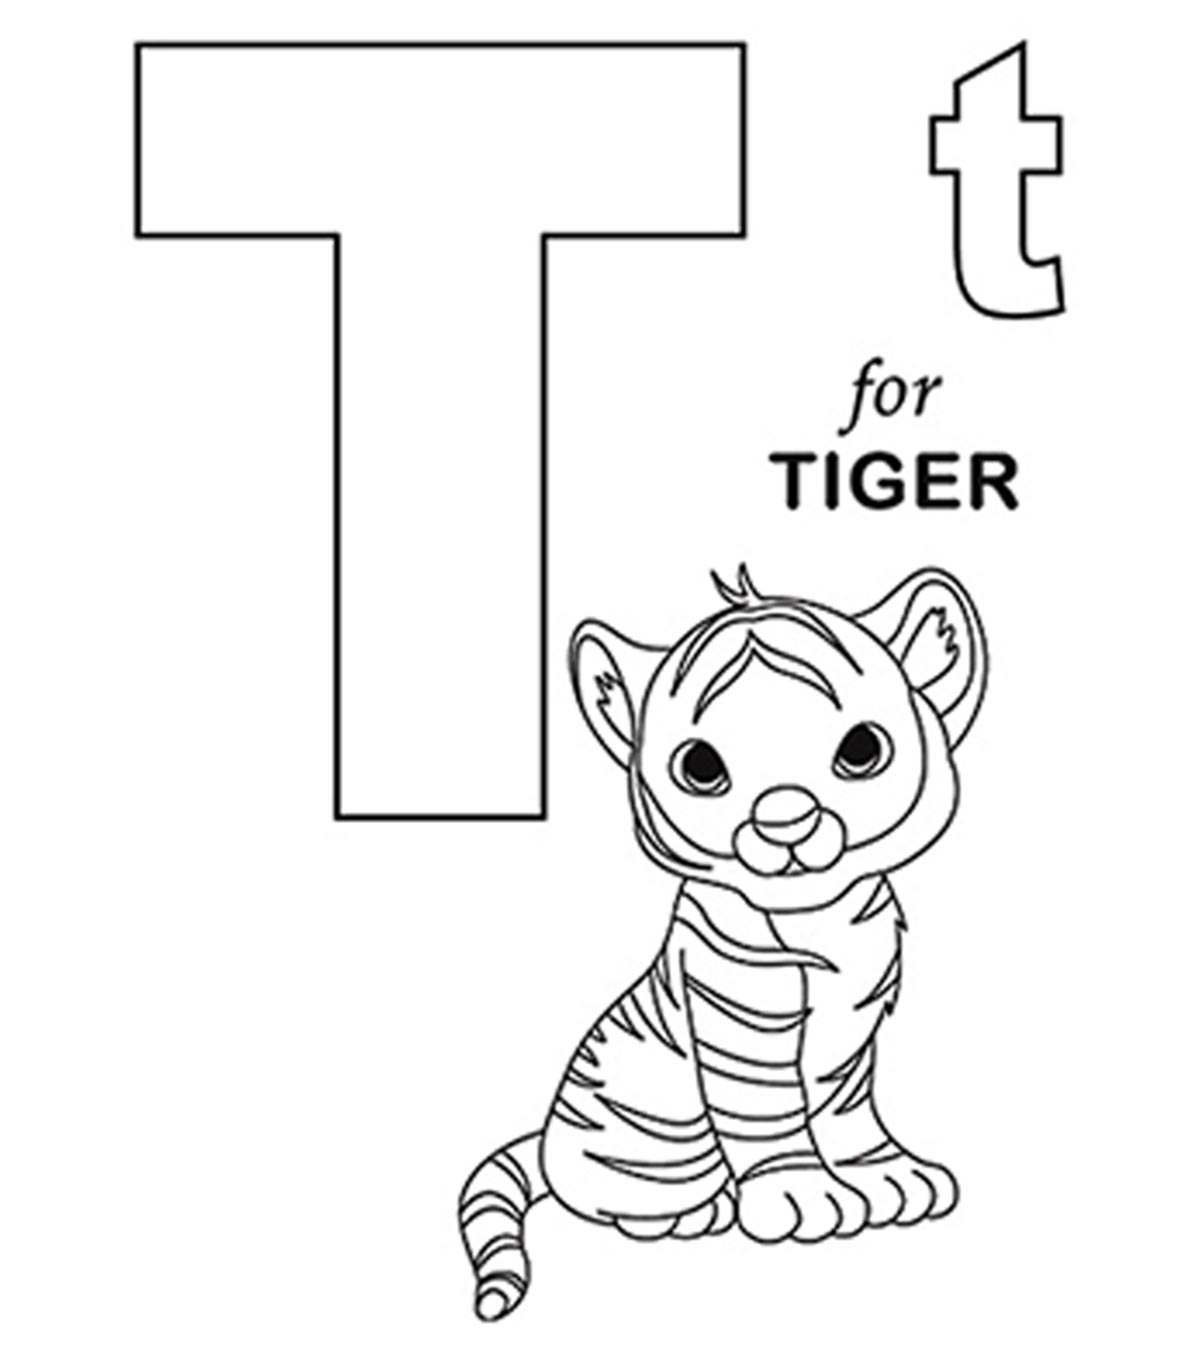 36-letter-t-coloring-book